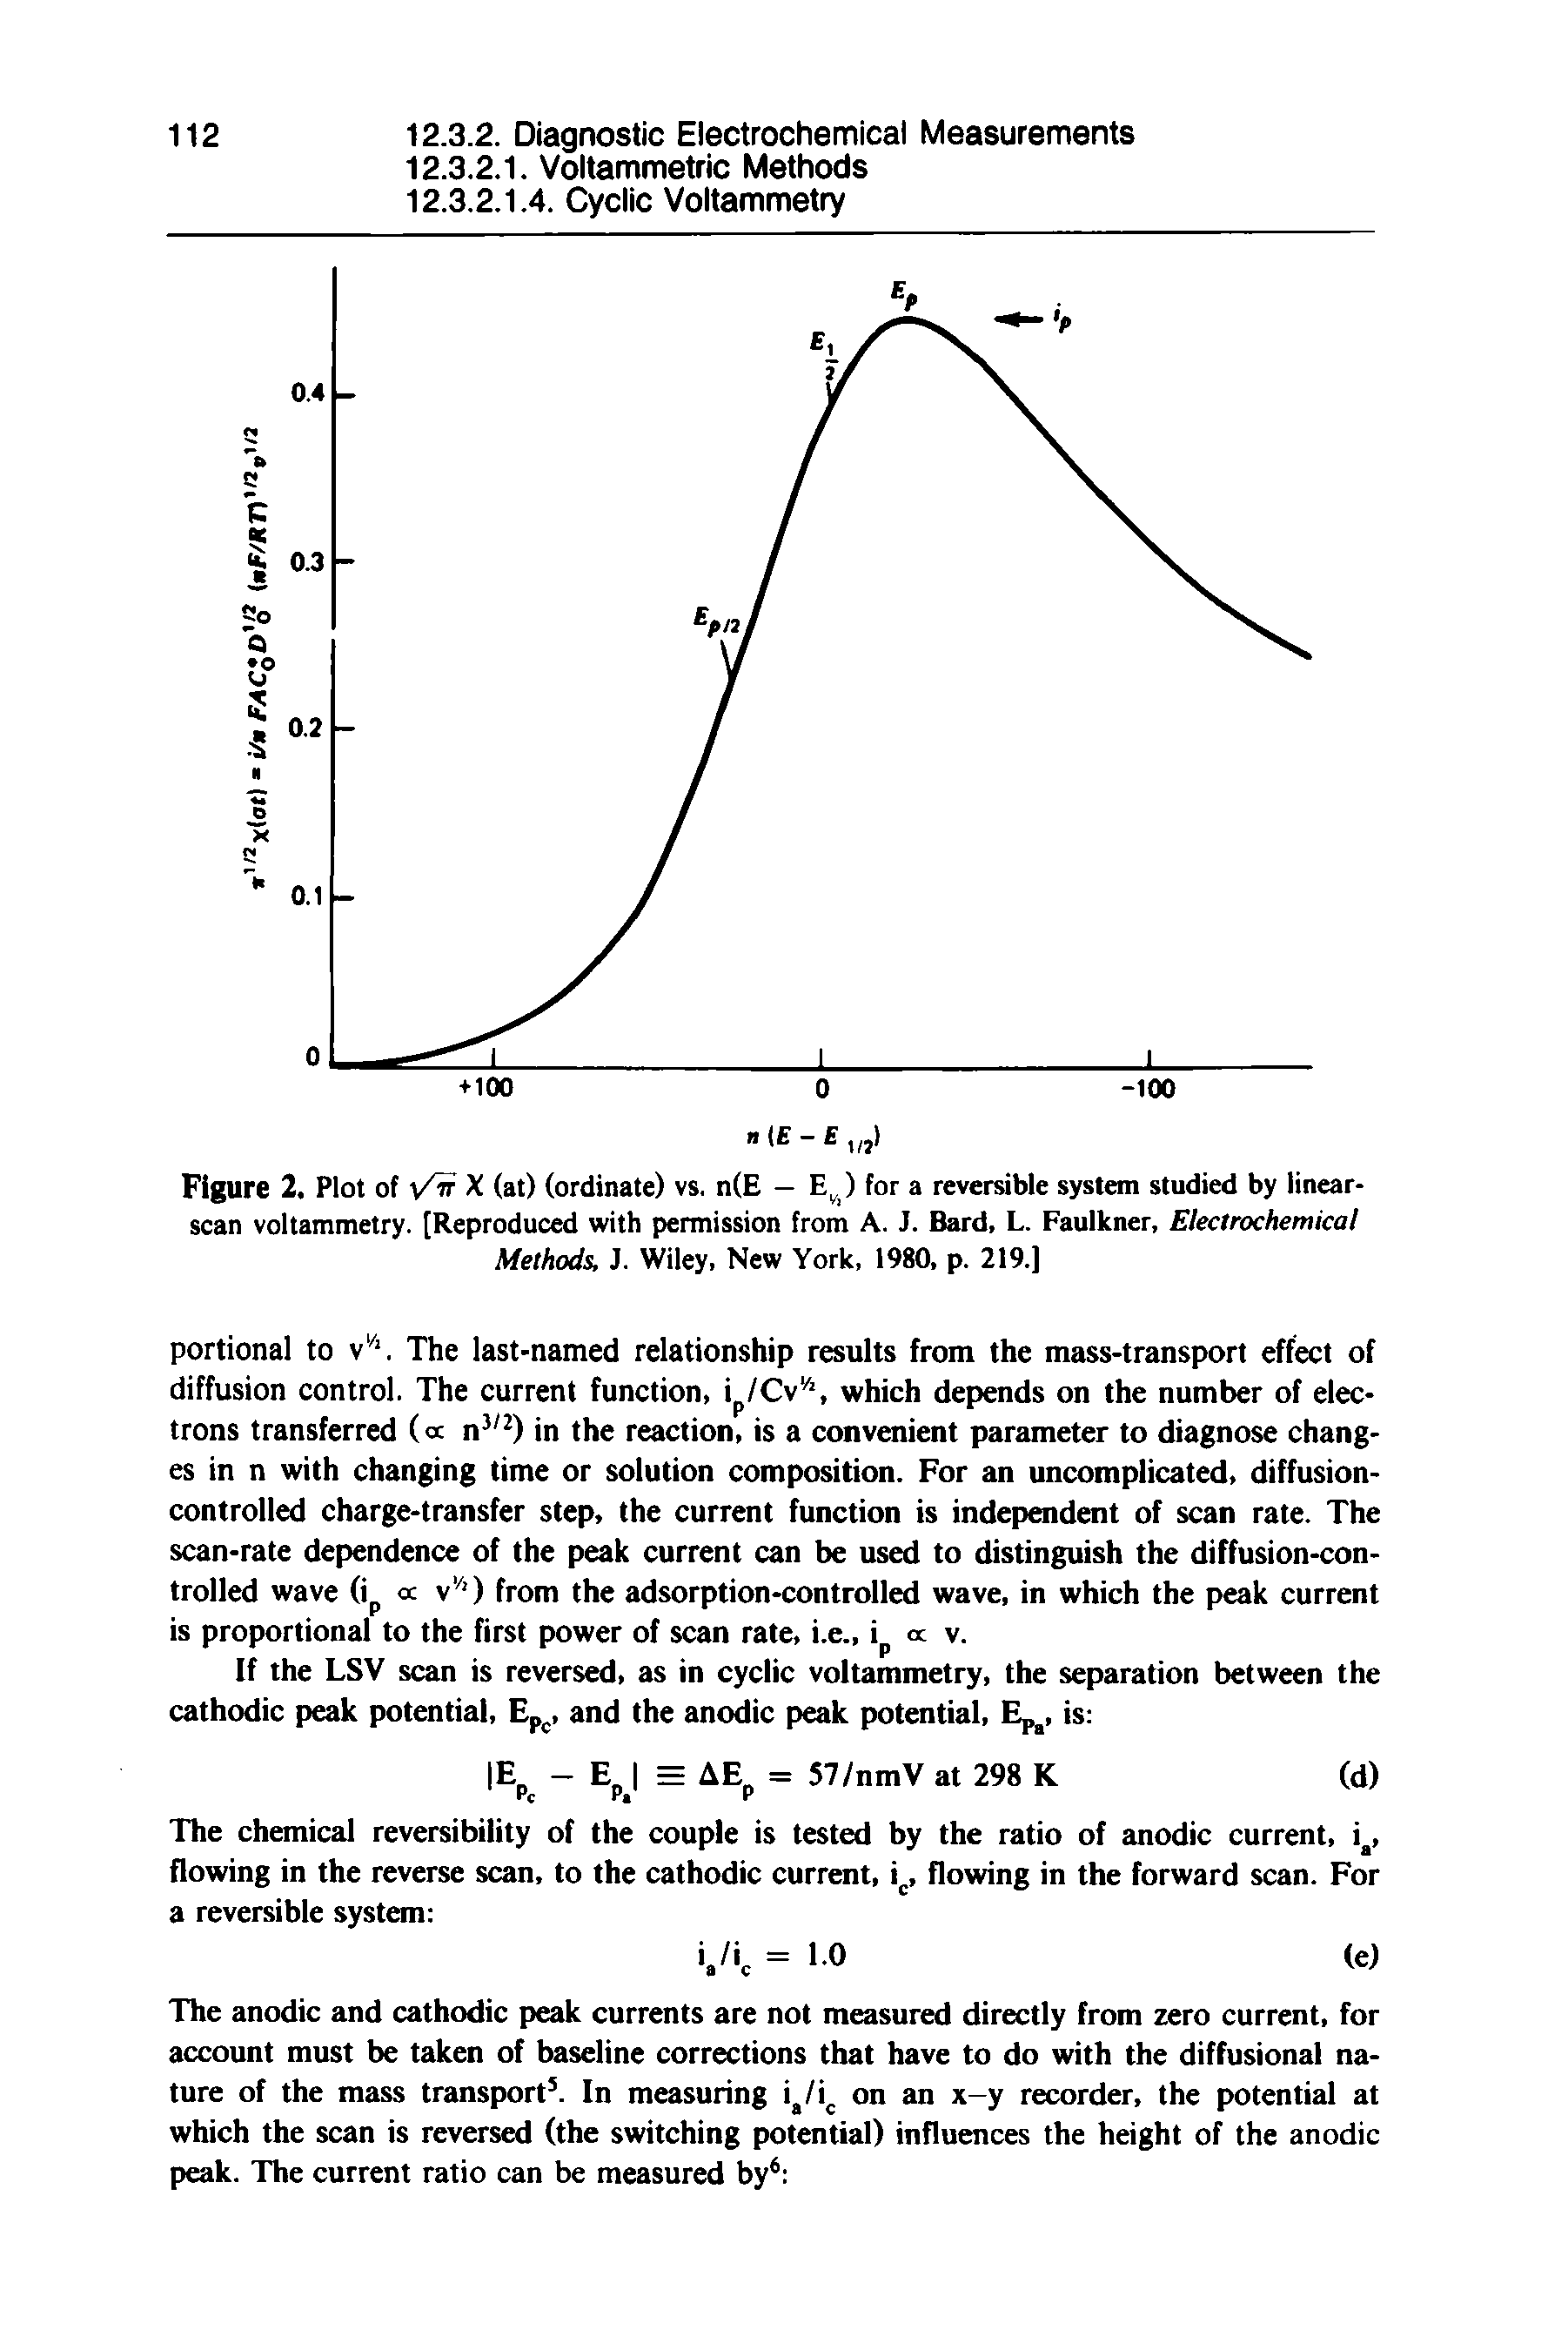 Figure 2. Plot of X (at) (ordinate) vs. n(E — E, ) for a reversible system studied by linear-scan voltammetry. [Reproduced with permission from A. J. Bard, L. Faulkner, Electrochemical Methods. J. Wiley, New York, 1980, p. 219.]...